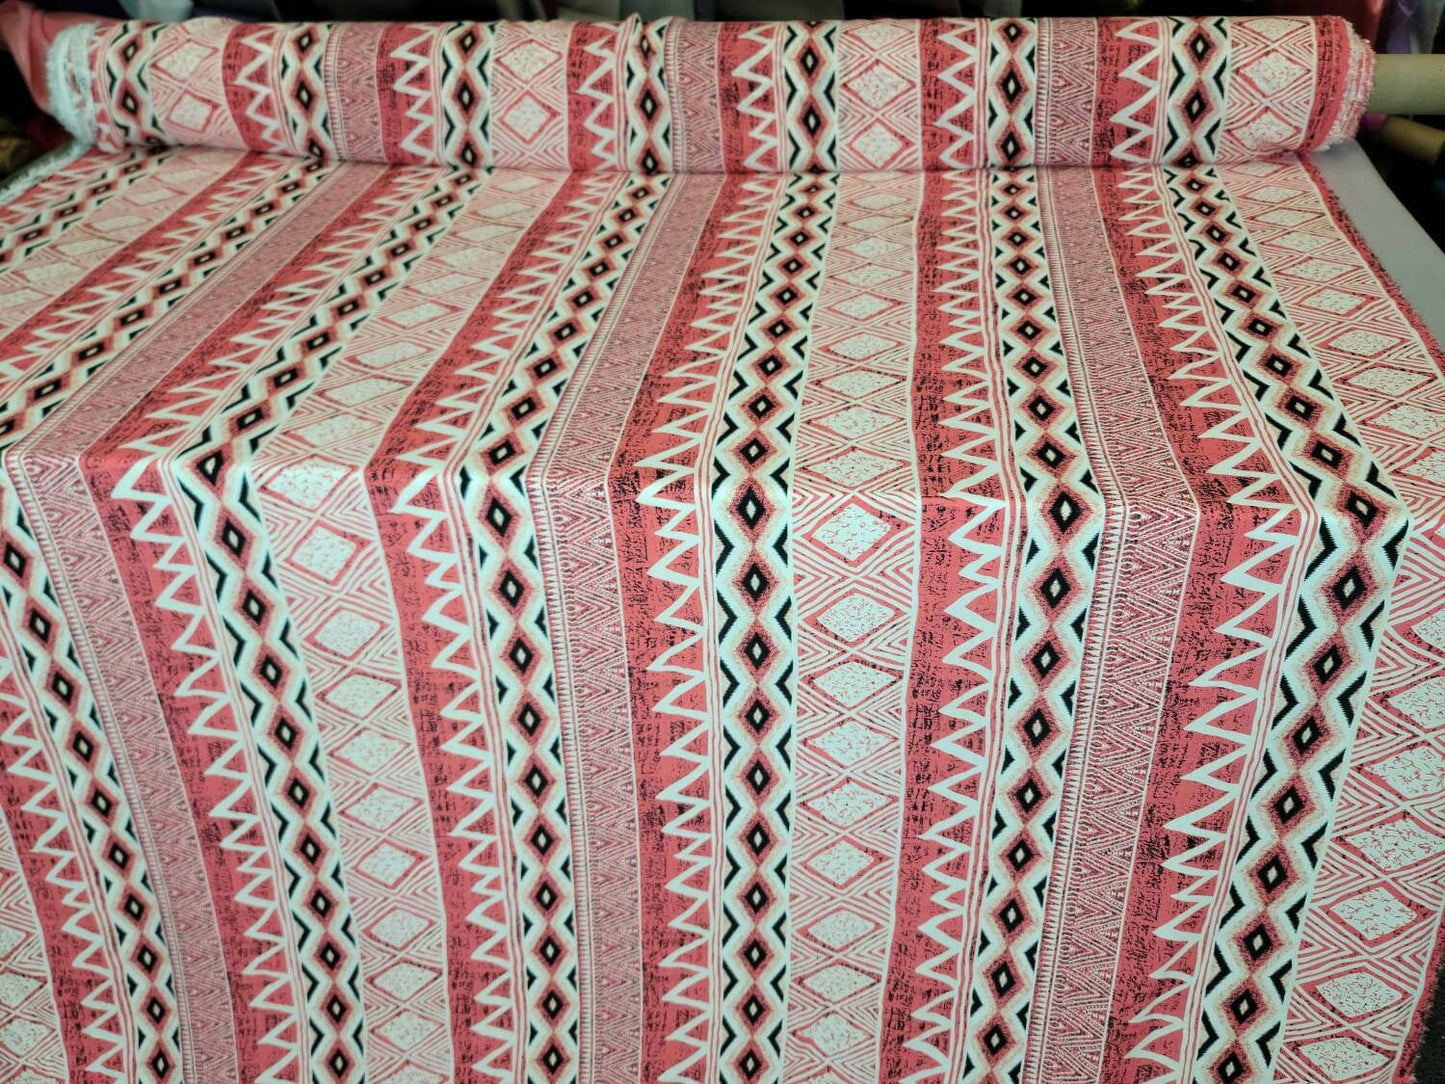 Rayon Challis Fabric By The Yard Pink Coral Off White Print Abstract Dress Draping Clothing Decoration